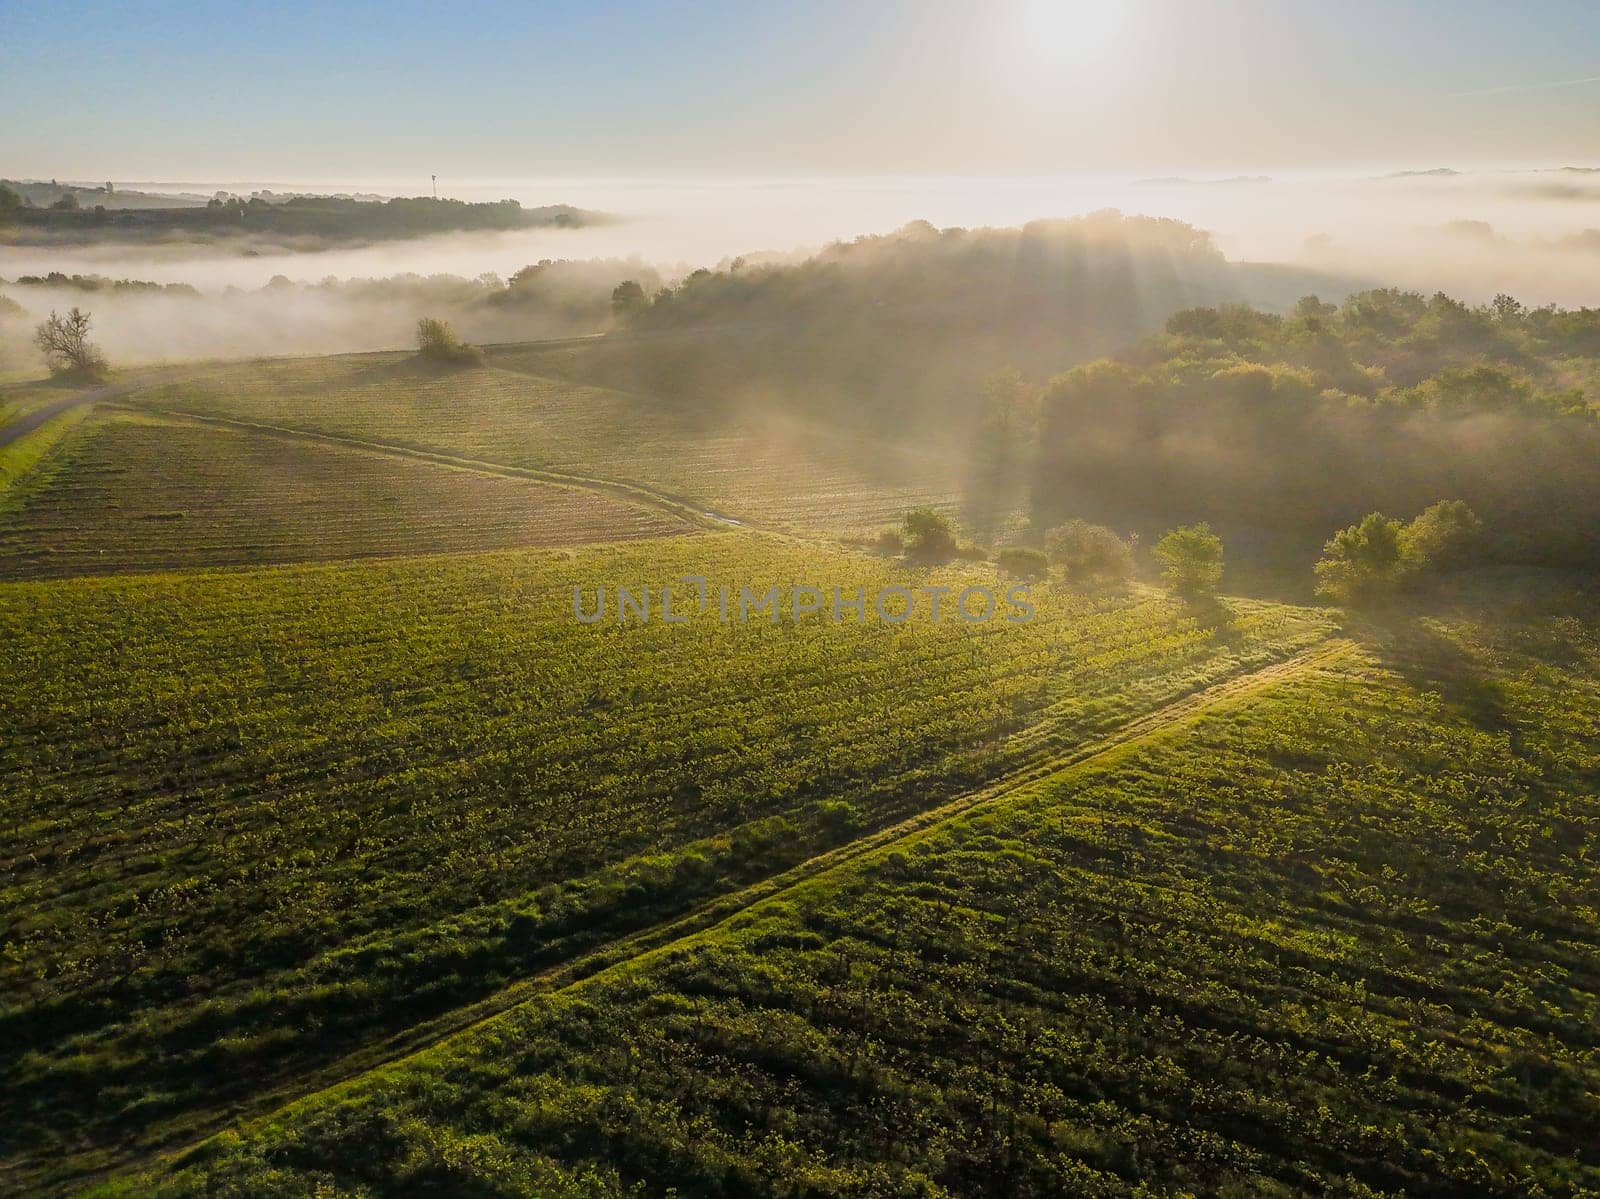 Aerial view of Bordeaux vineyard at sunrise spring under fog, Rions, Gironde, France. High quality photo